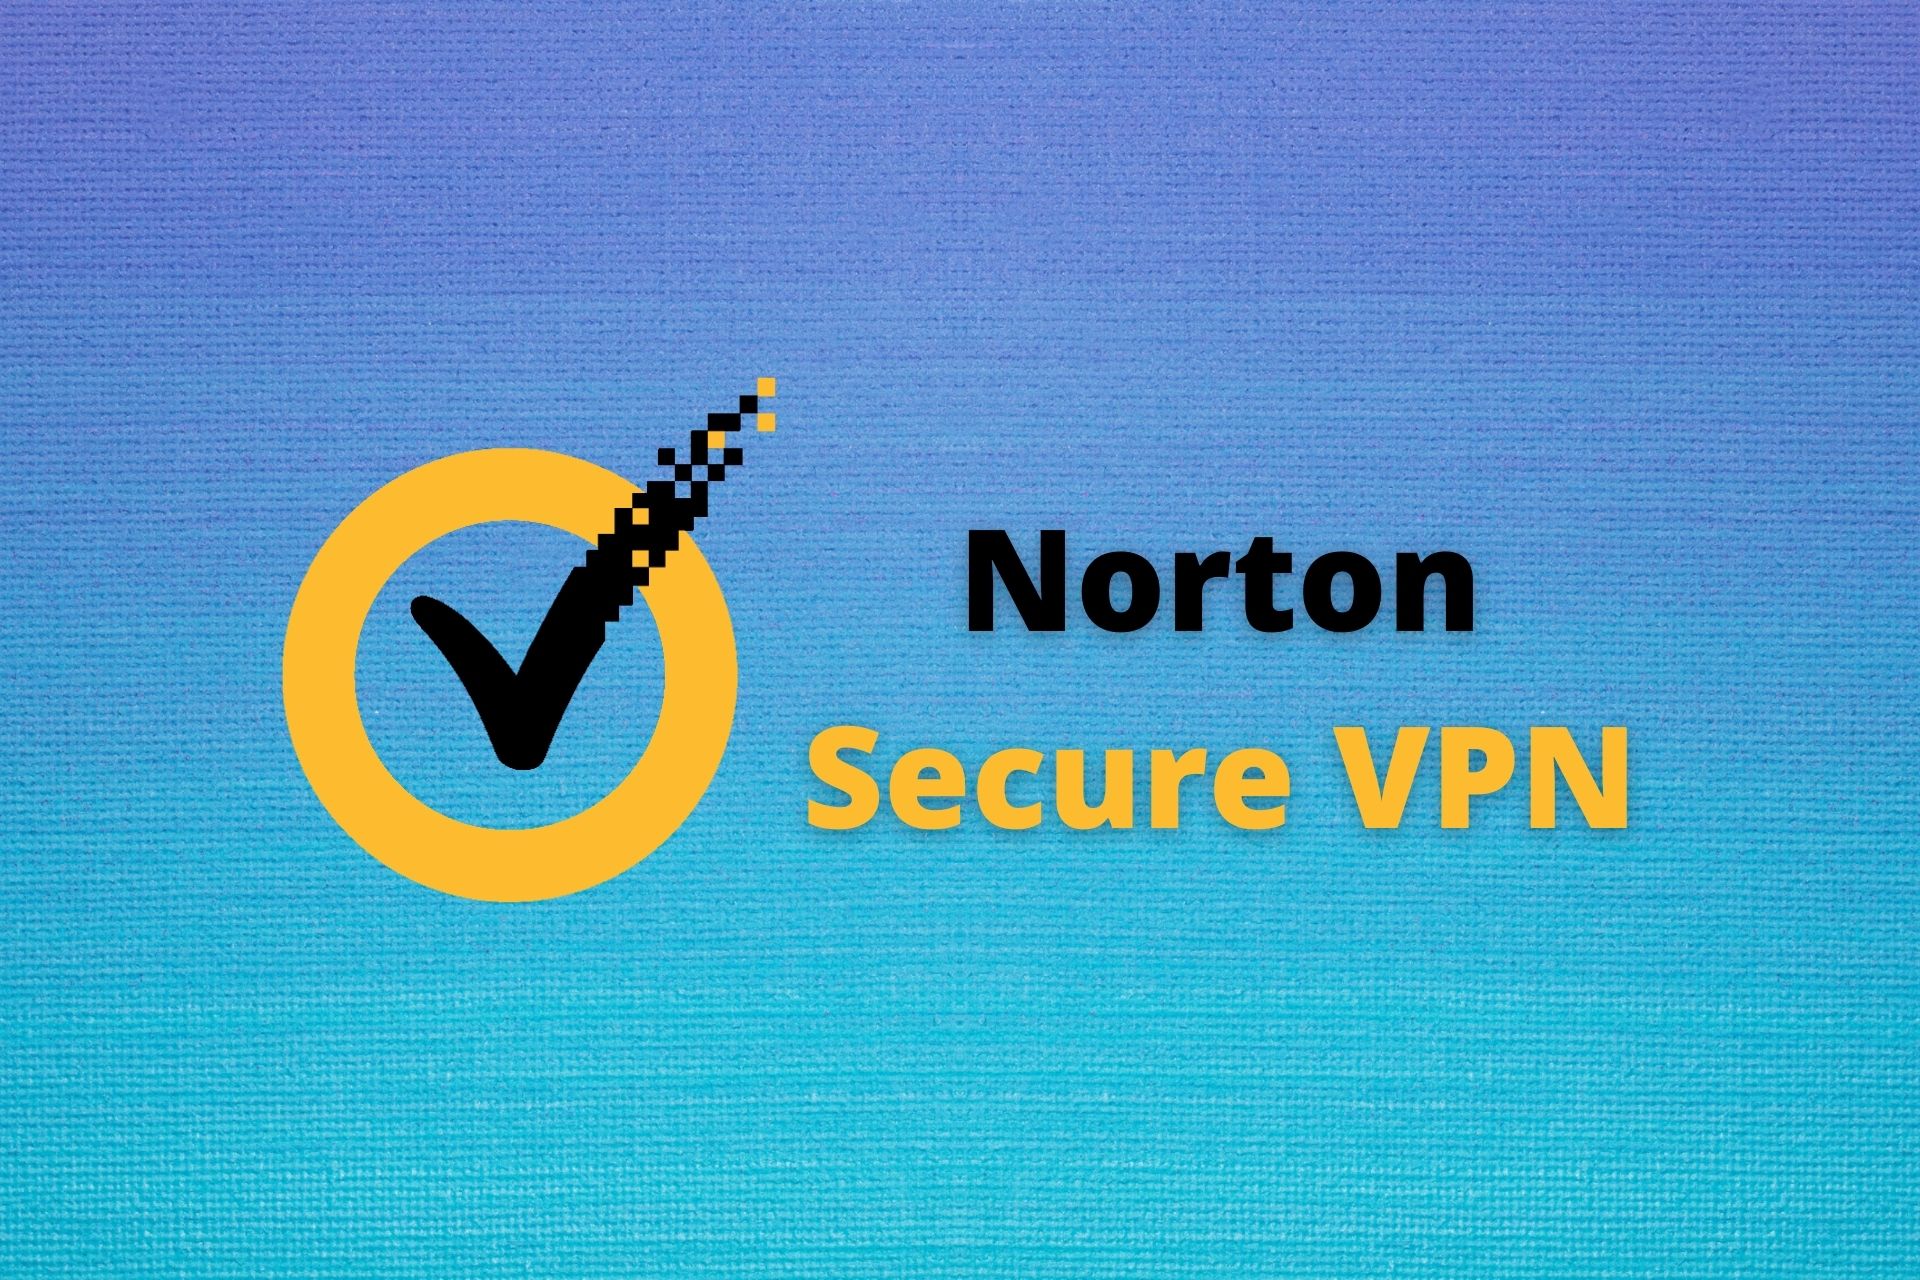 Norton Secure VPN stopped working